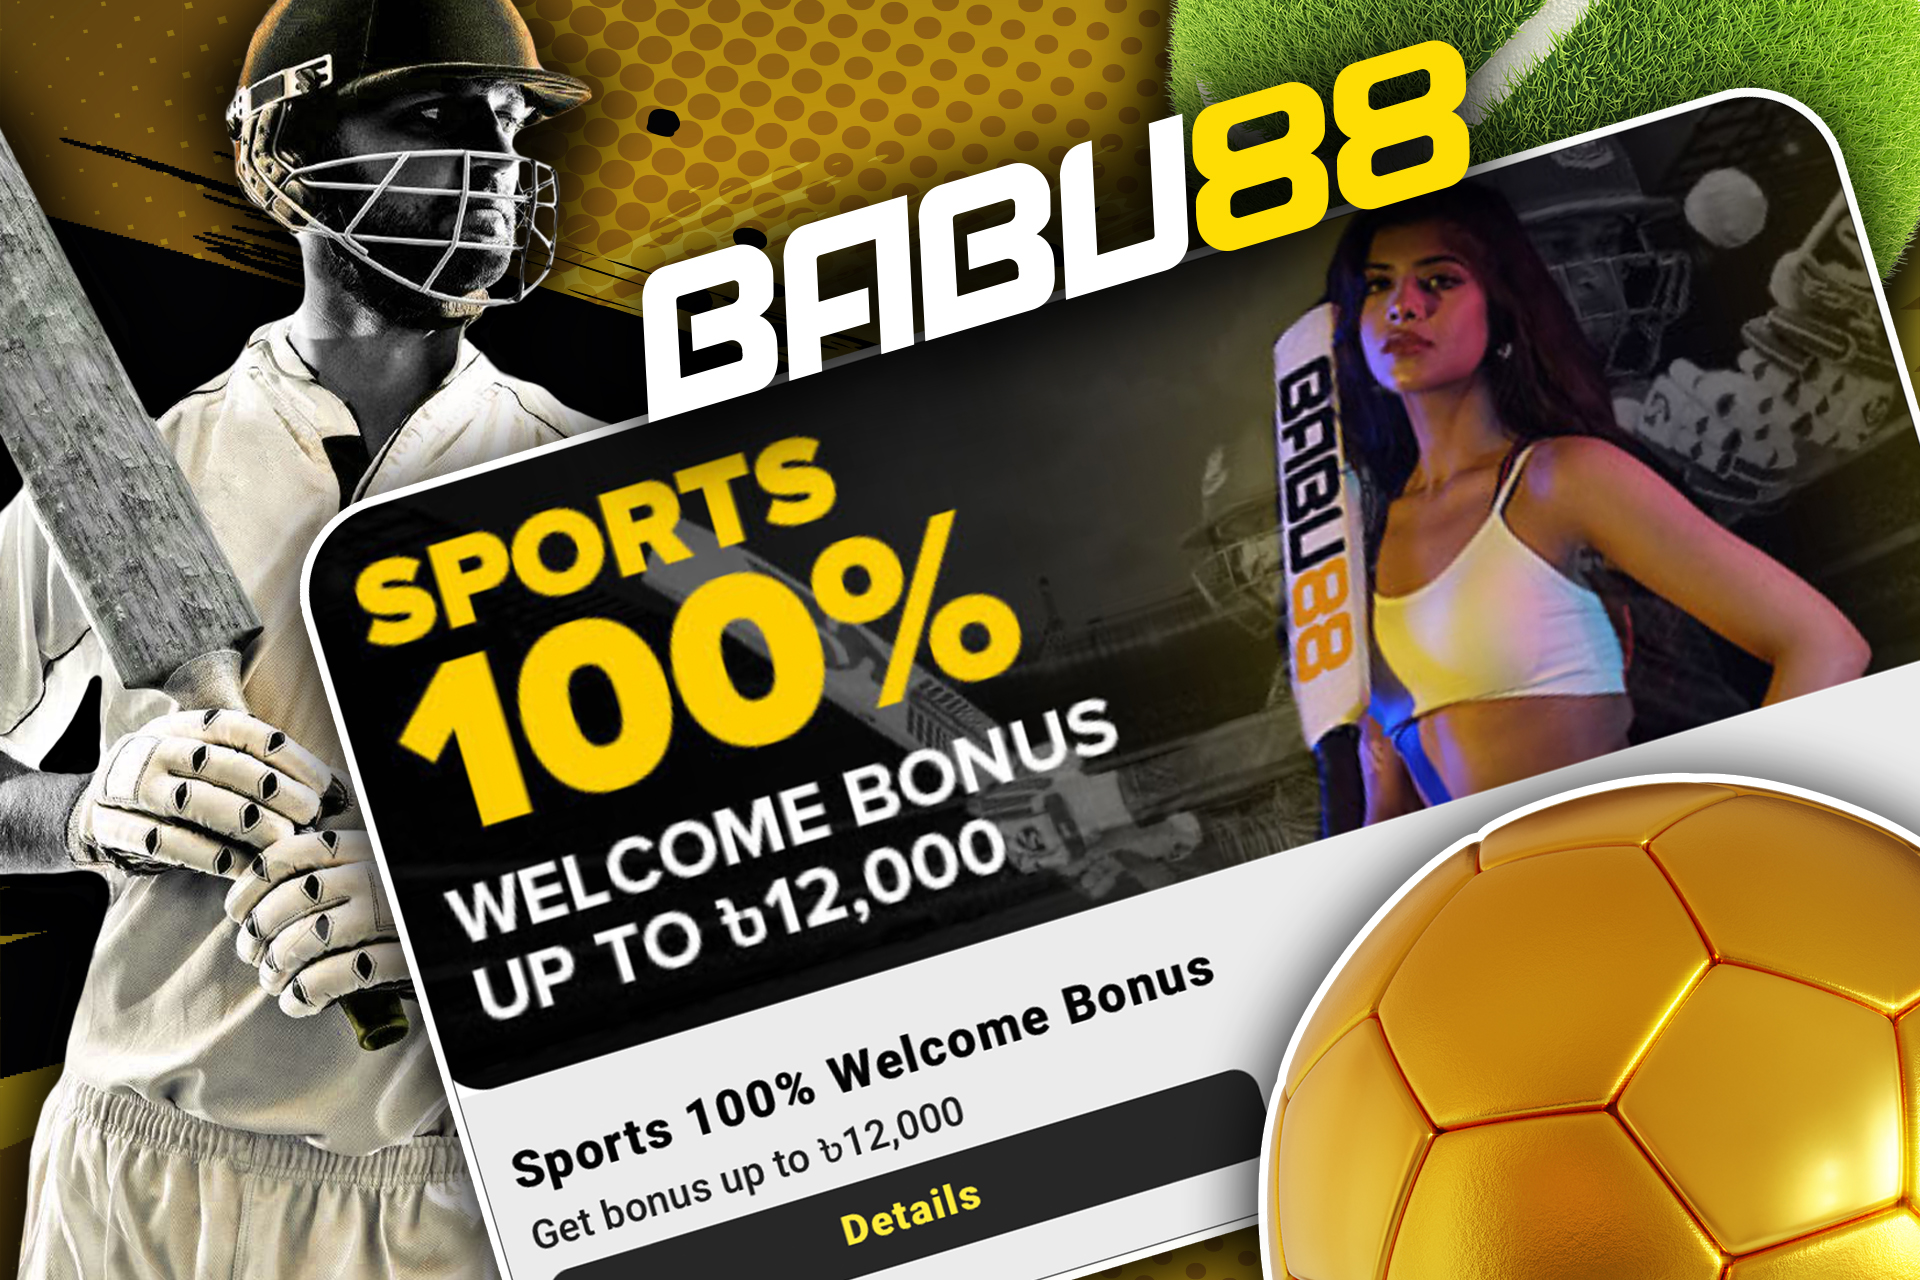 Get a 100% bonus of up to 12,000B DT on sports betting.